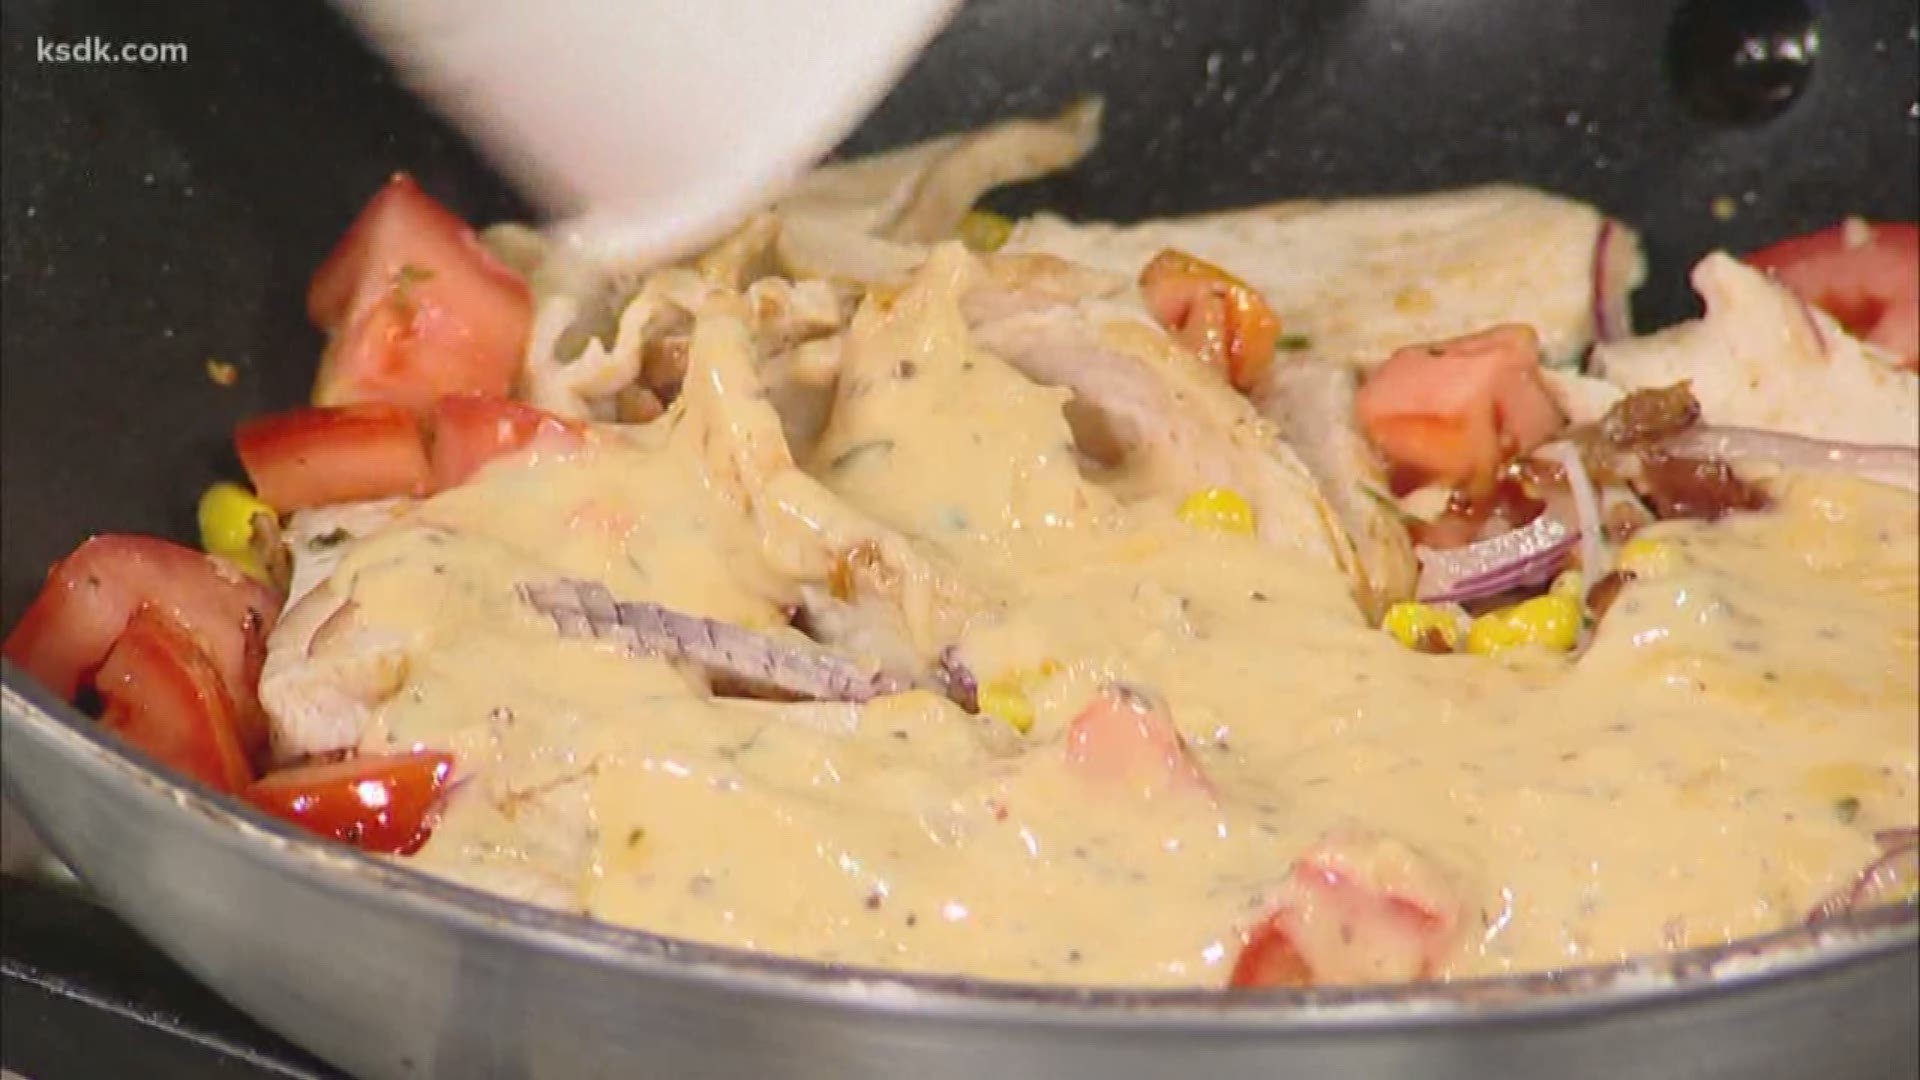 The local O’Charley’s team showcased a recipe for their new menu item!